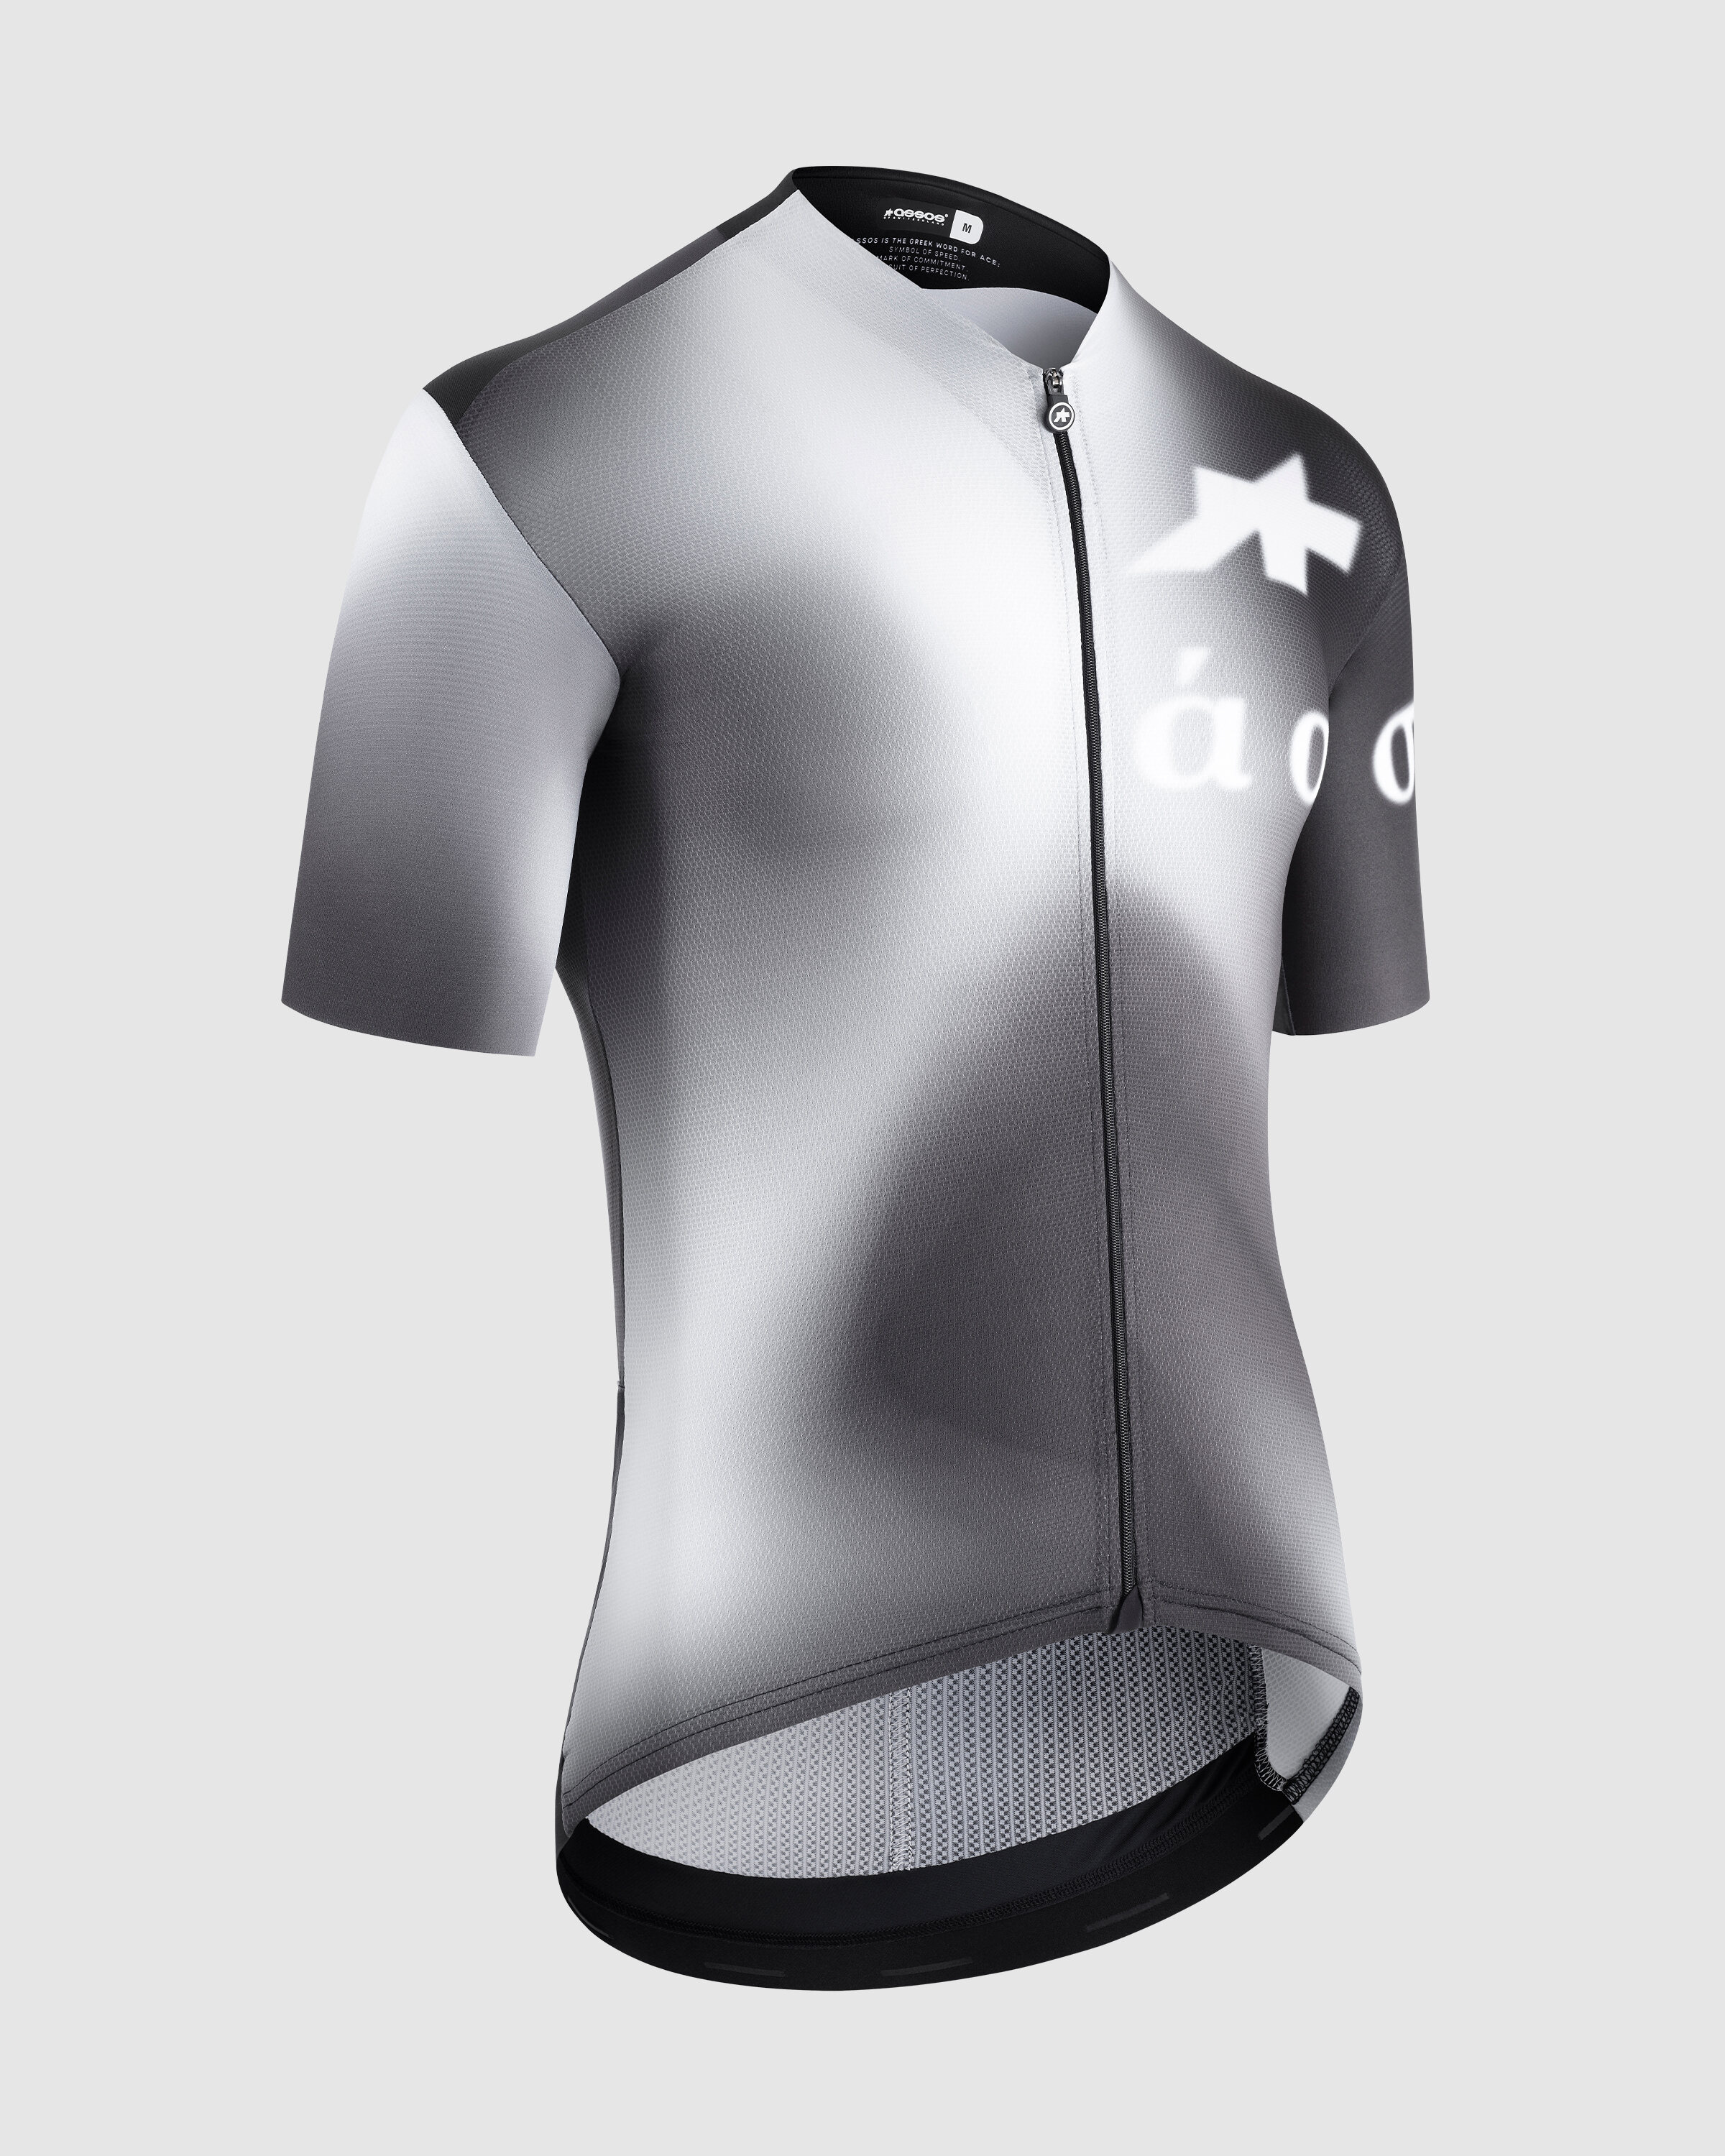 EQUIPE RS JERSEY S9 TARGA - MYTH WITHIN - ASSOS Of Switzerland - Official Outlet